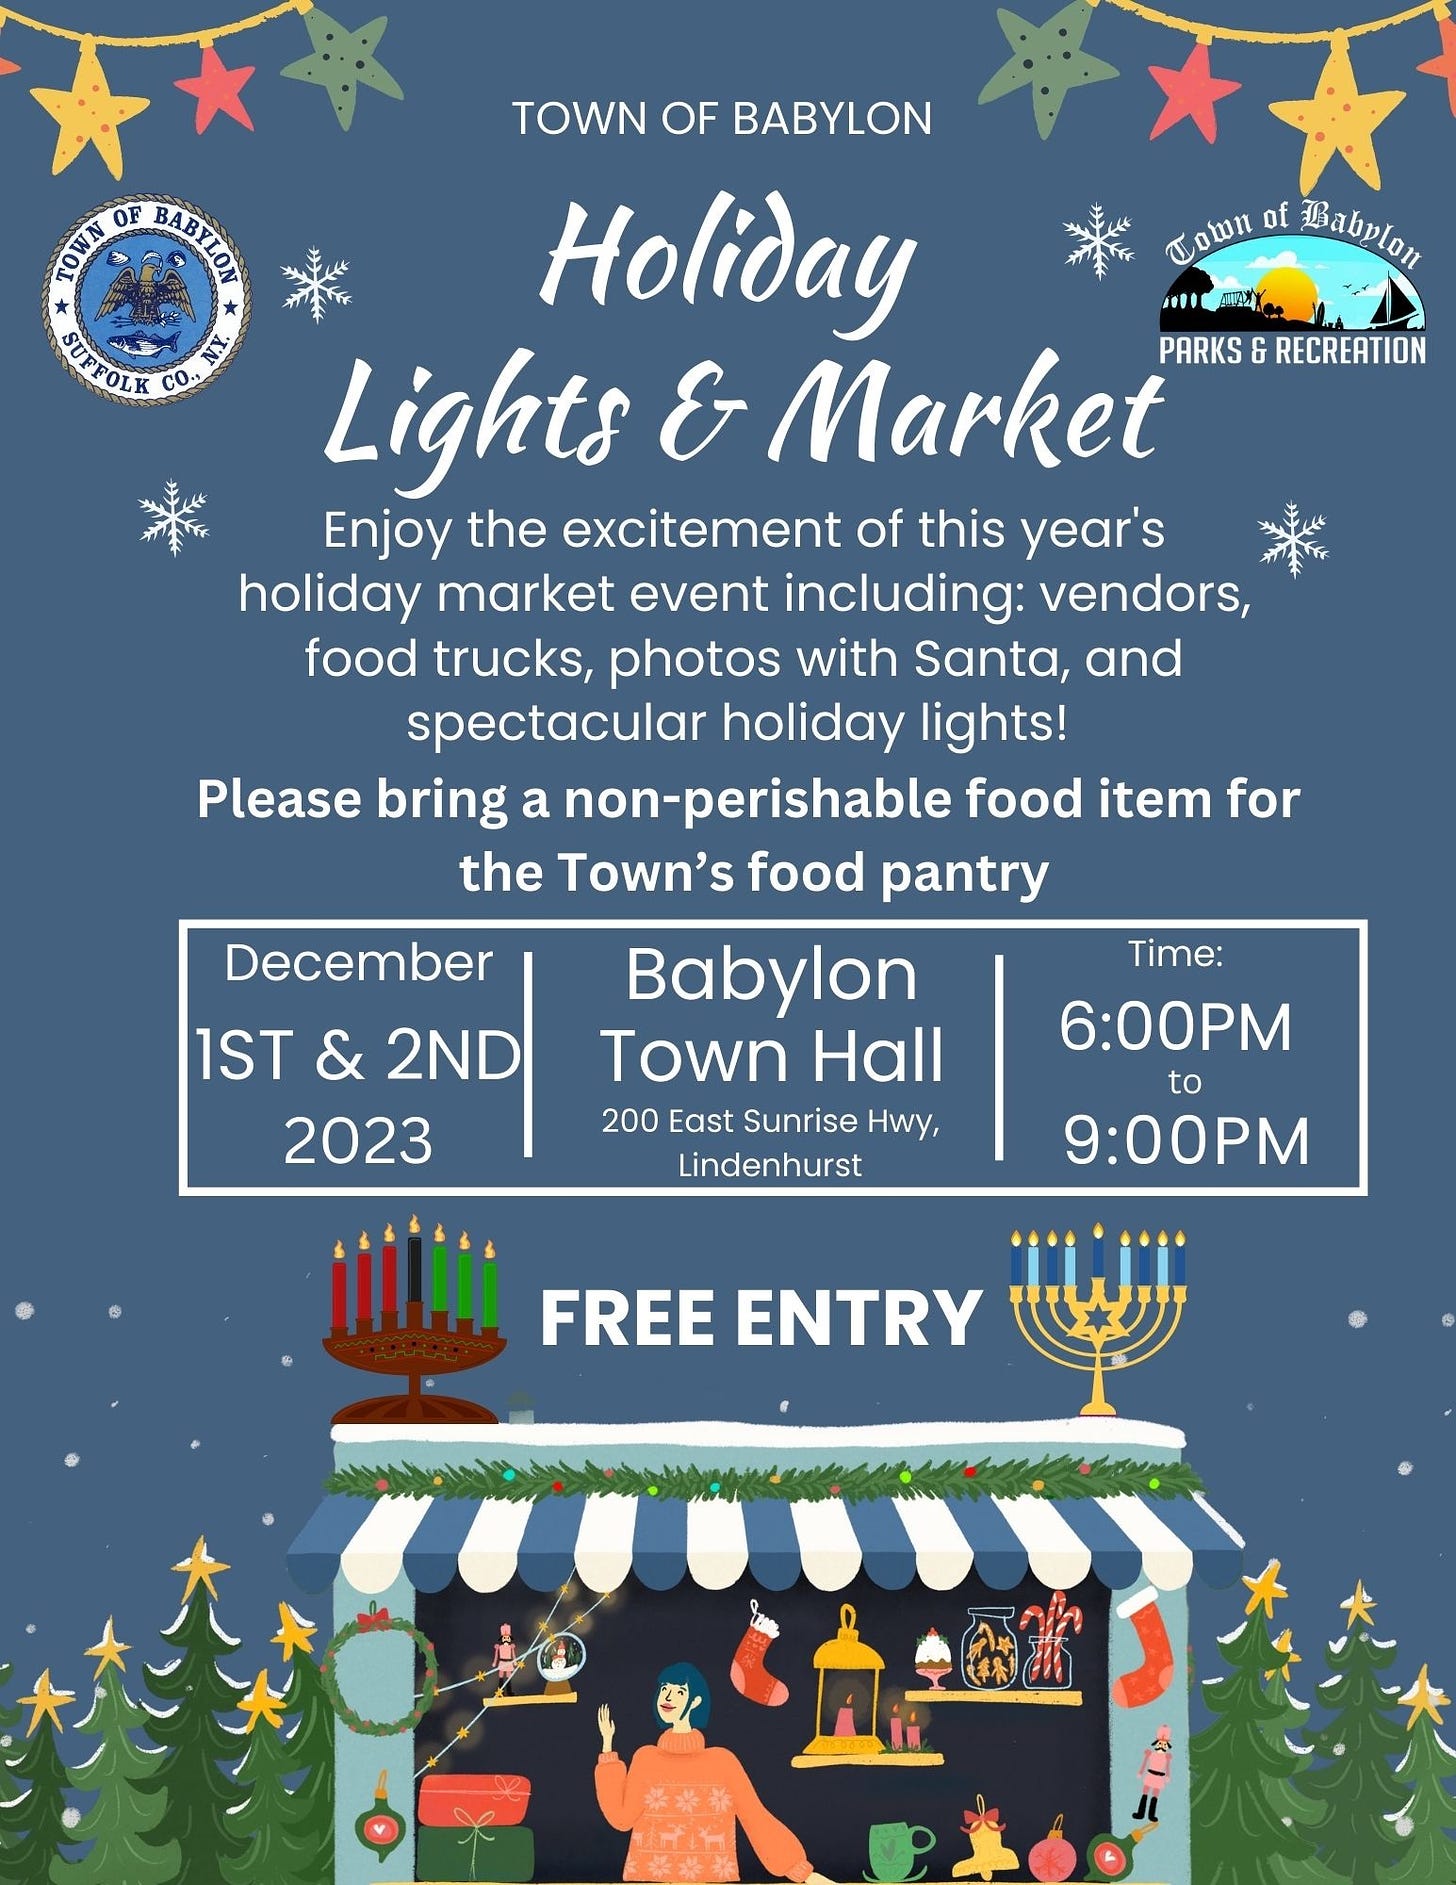 May be an image of text that says 'TOWN BABTION SUFFOLK CO., Ûotn_of_Bablon Lown of Babplou TOWN OF BABYLON Holiday Lights & Market PARKS RECREATION Enjoy the excitement of this year's holiday market event including: vendors, food trucks, photos with Santa, and spectacular holiday lights! Please bring a non-perishable food item for the Town's food pantry Babylon Town Hall 200 East Sunrise Hwy, Lindenhurst December 1ST 2ND 2023 Time: 6:00PM to 9:00PM FREE ENTRY'